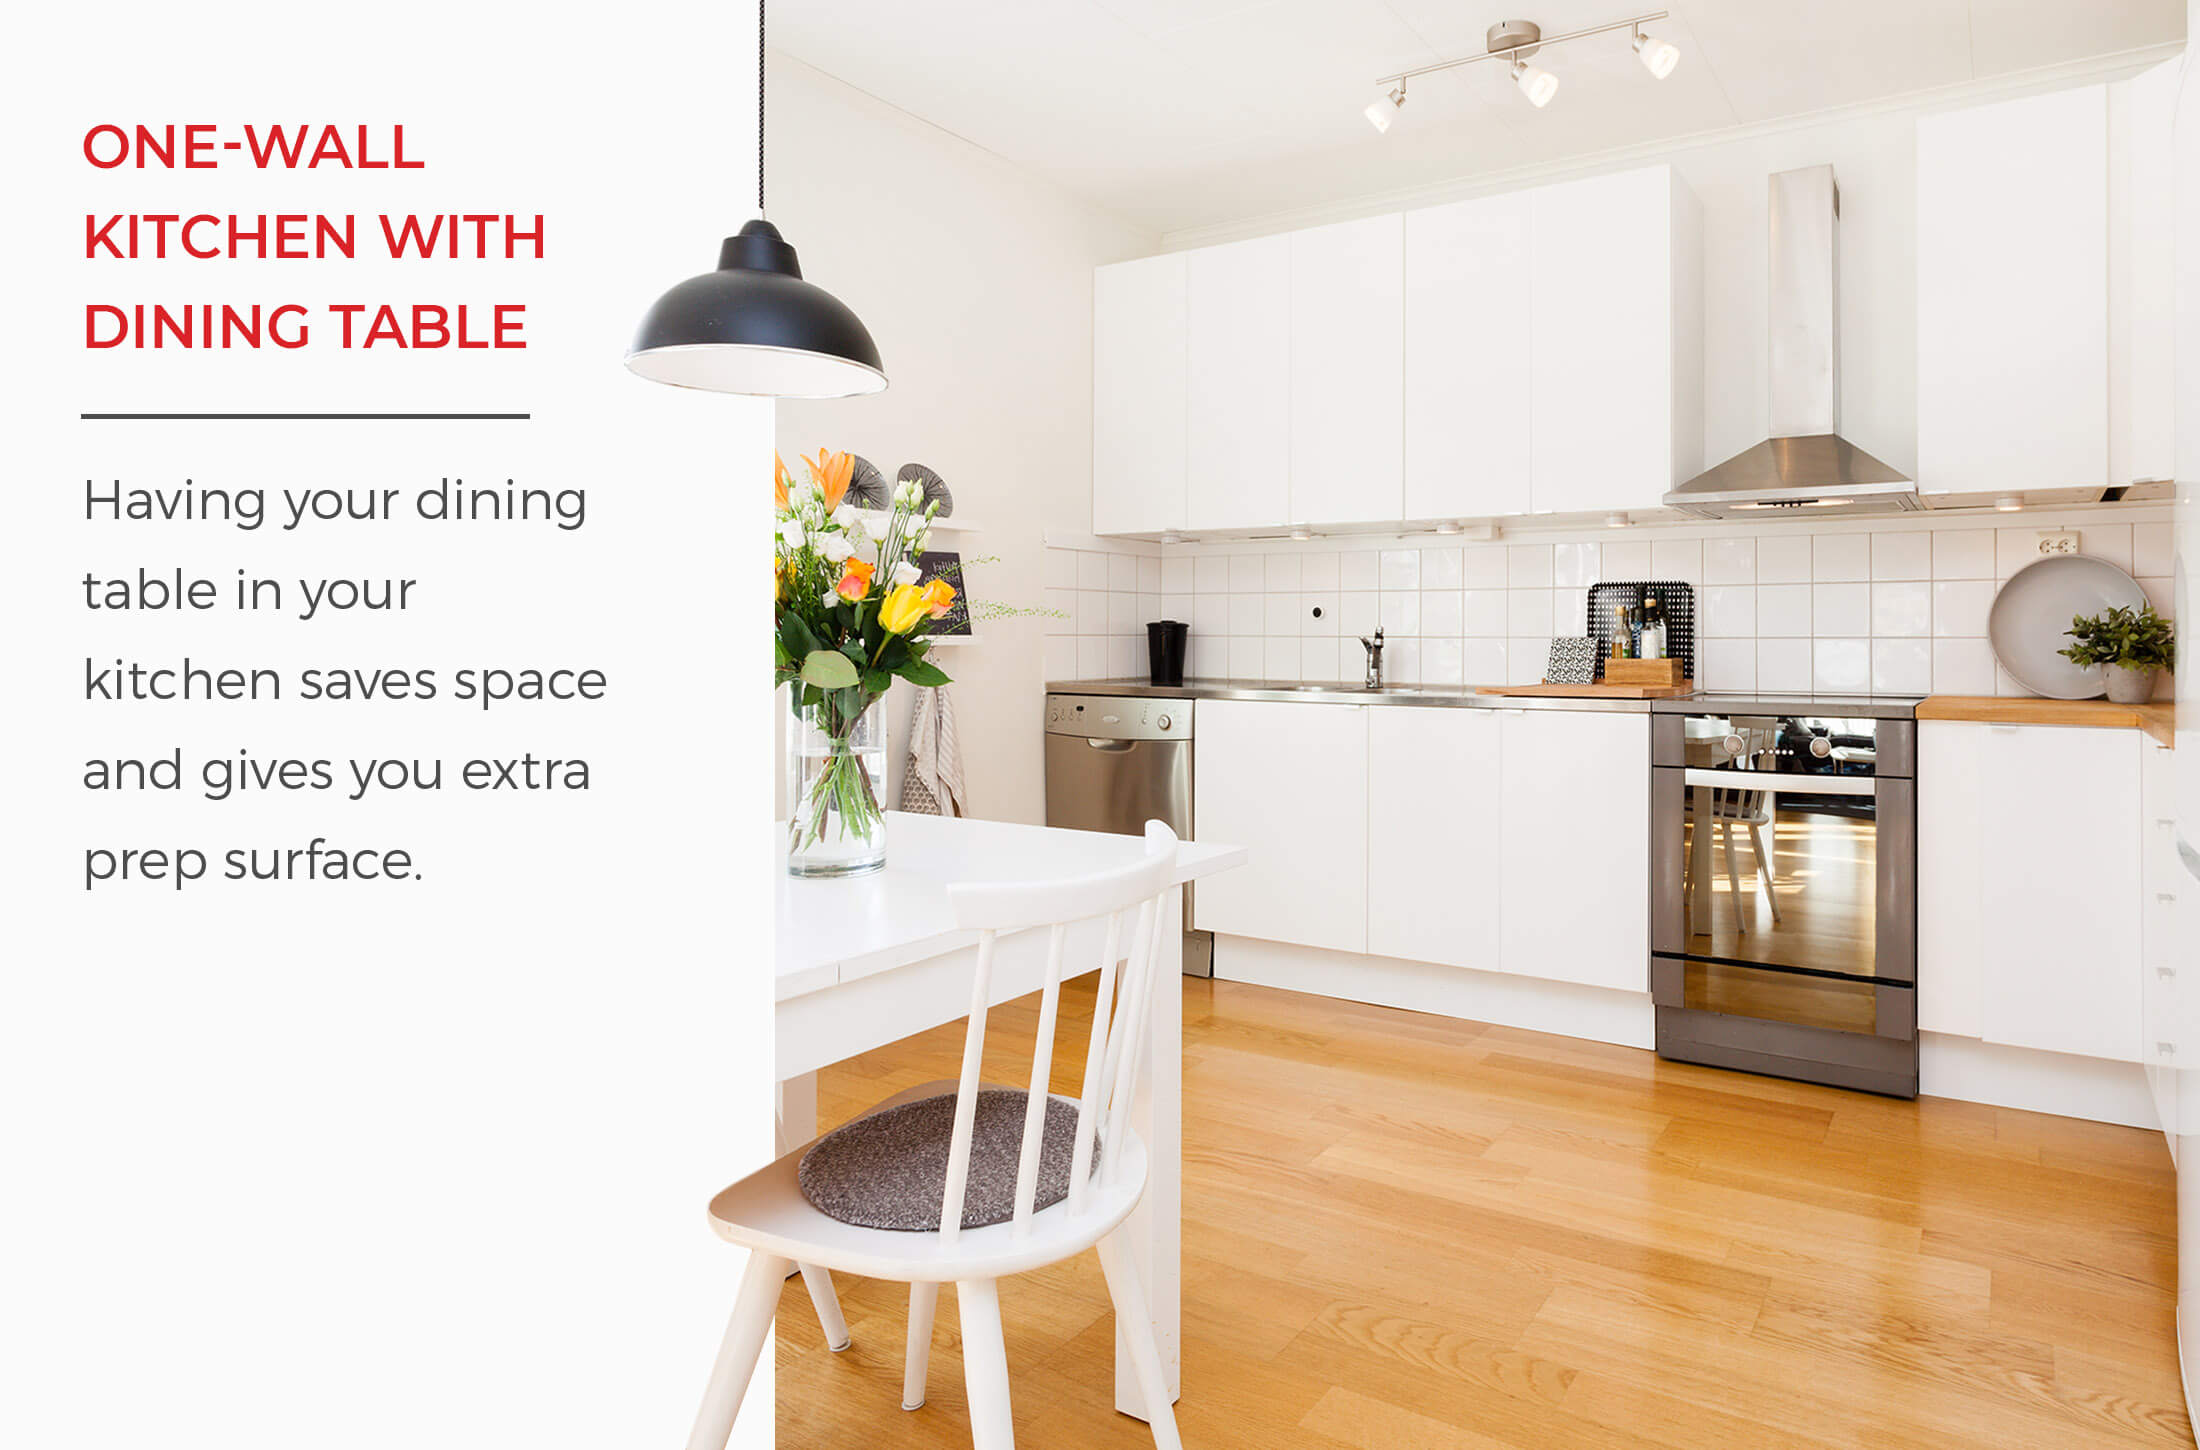 One-wall kitchen layout with dining table with text: Having your dining table in your kitchen saves space and gives you extra prep surface.